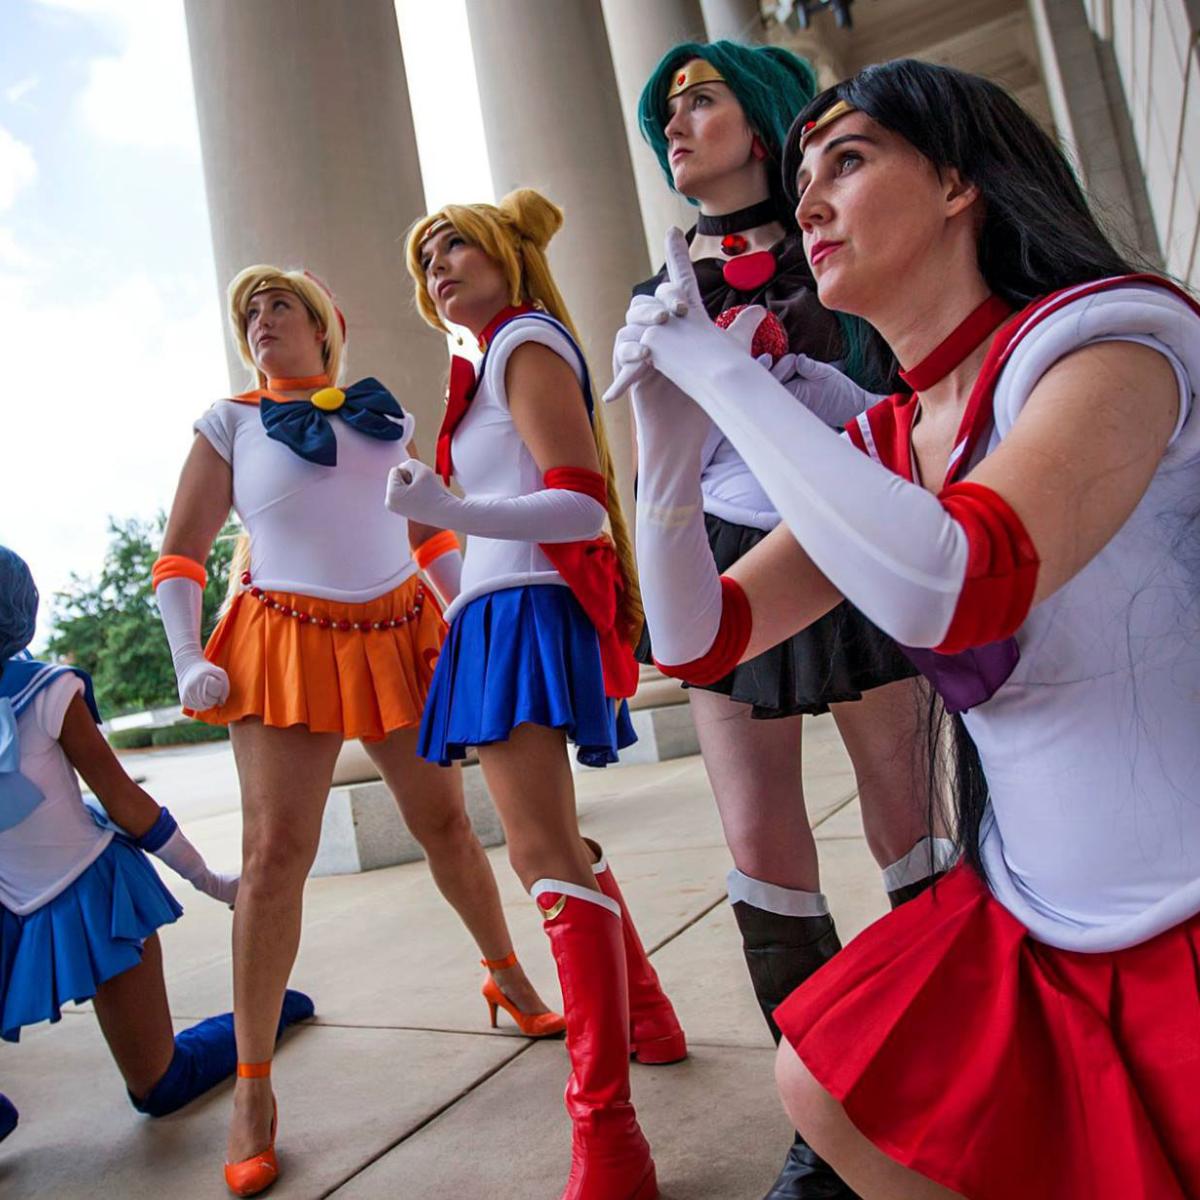 First ever St. Petersburg anime convention to take place in September | WFLA